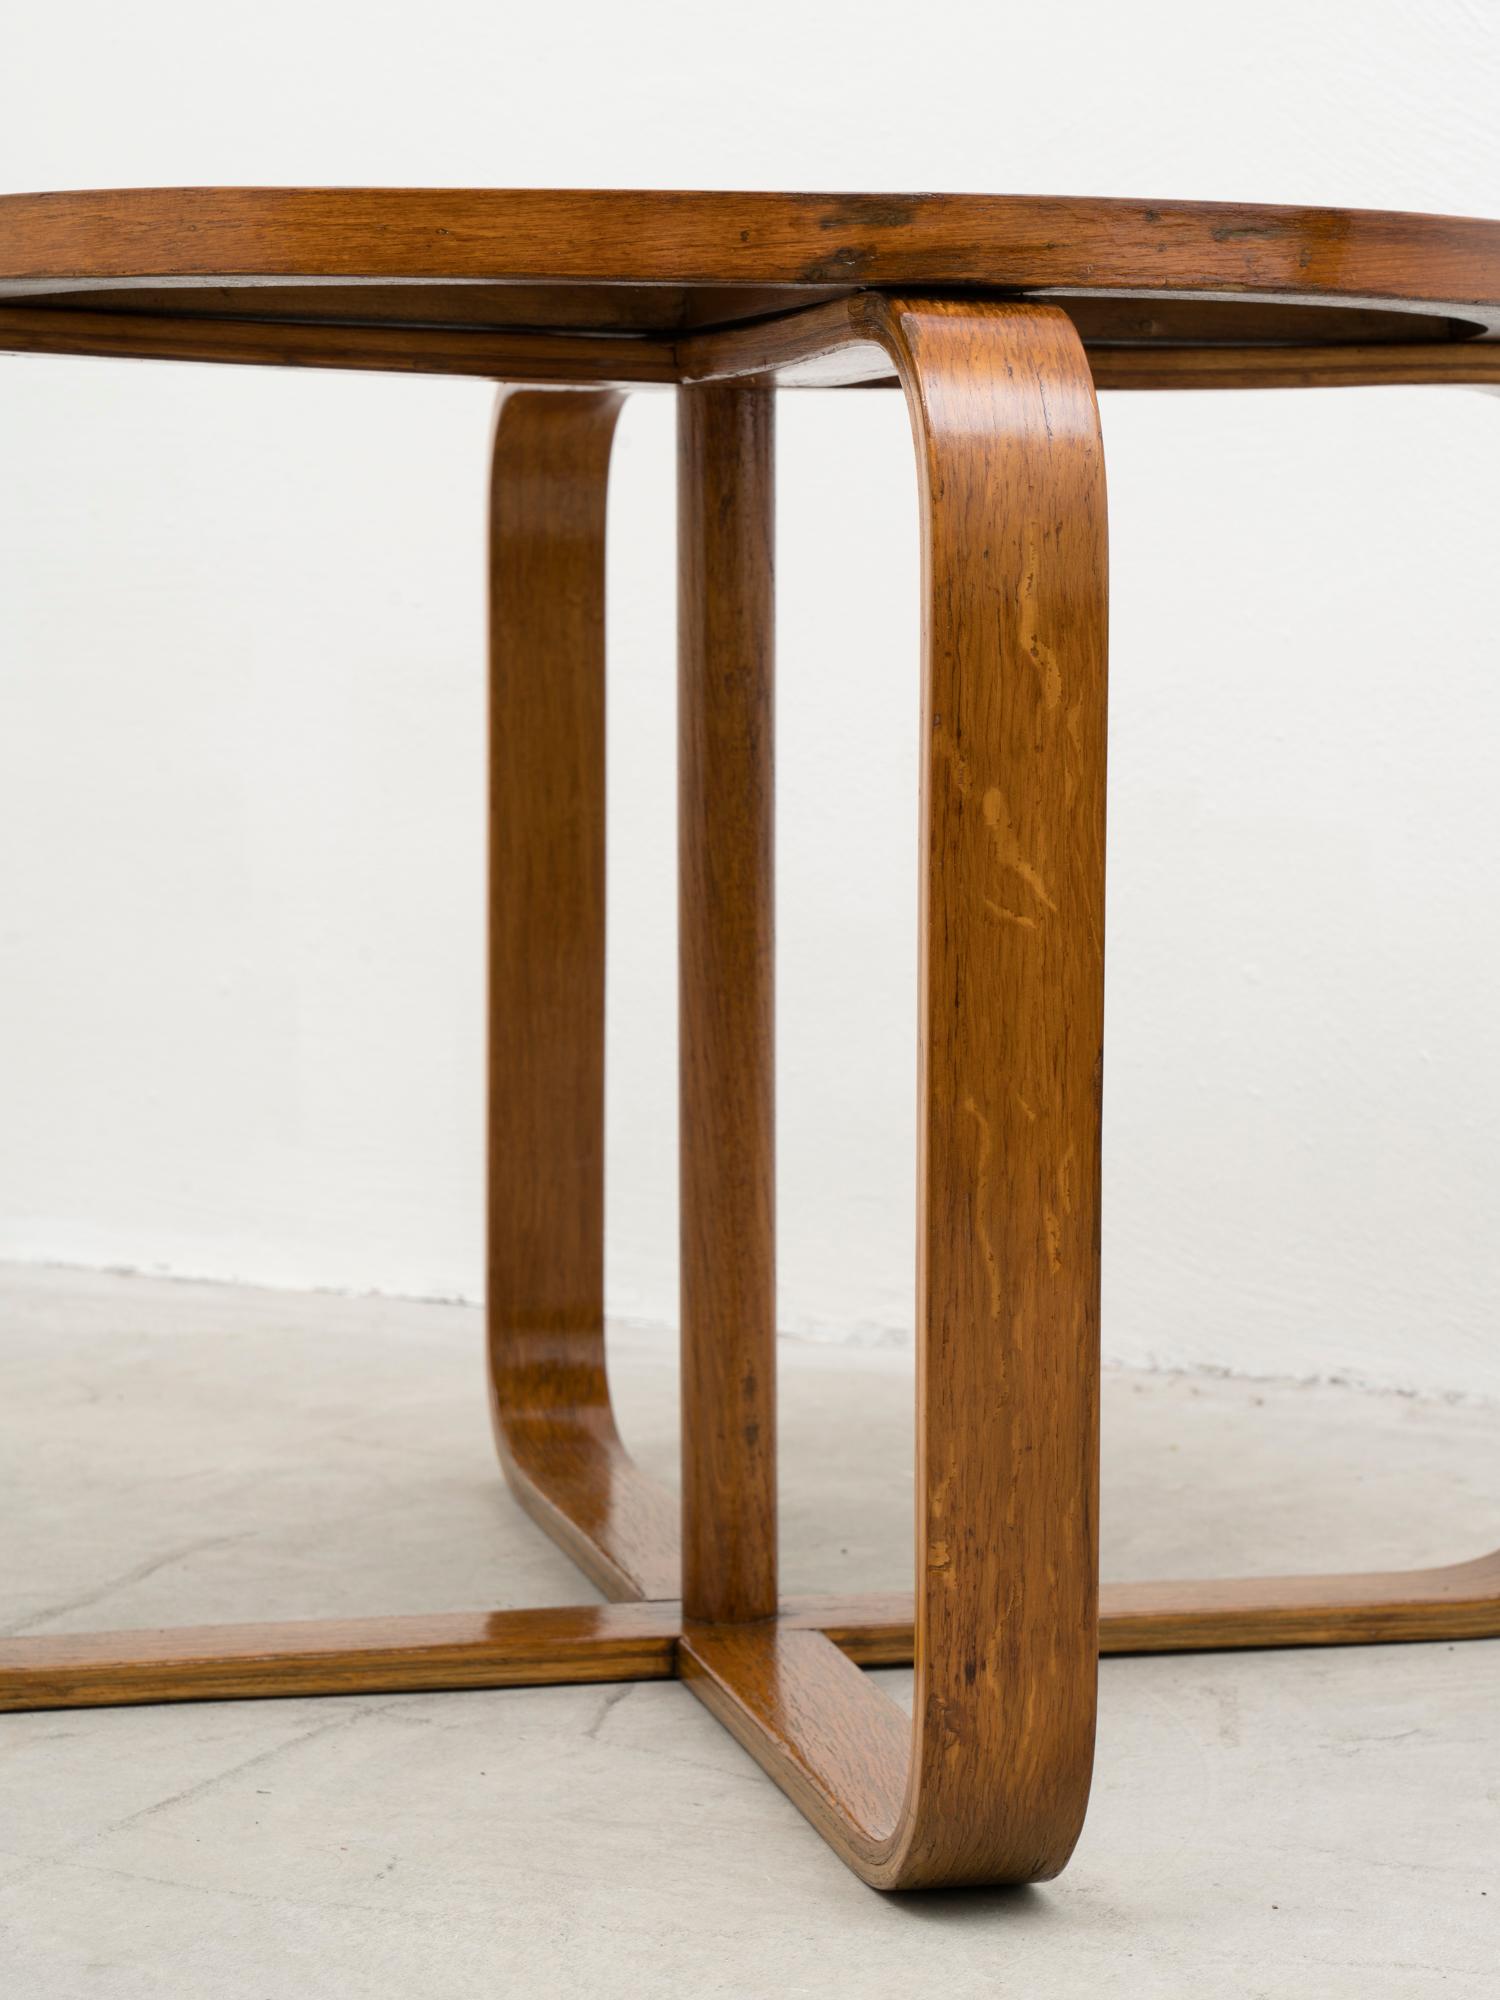 Rationalist Wooden Coffe Table by Giuseppe Pagano Pogatschnig for Maggioni 1940s For Sale 1